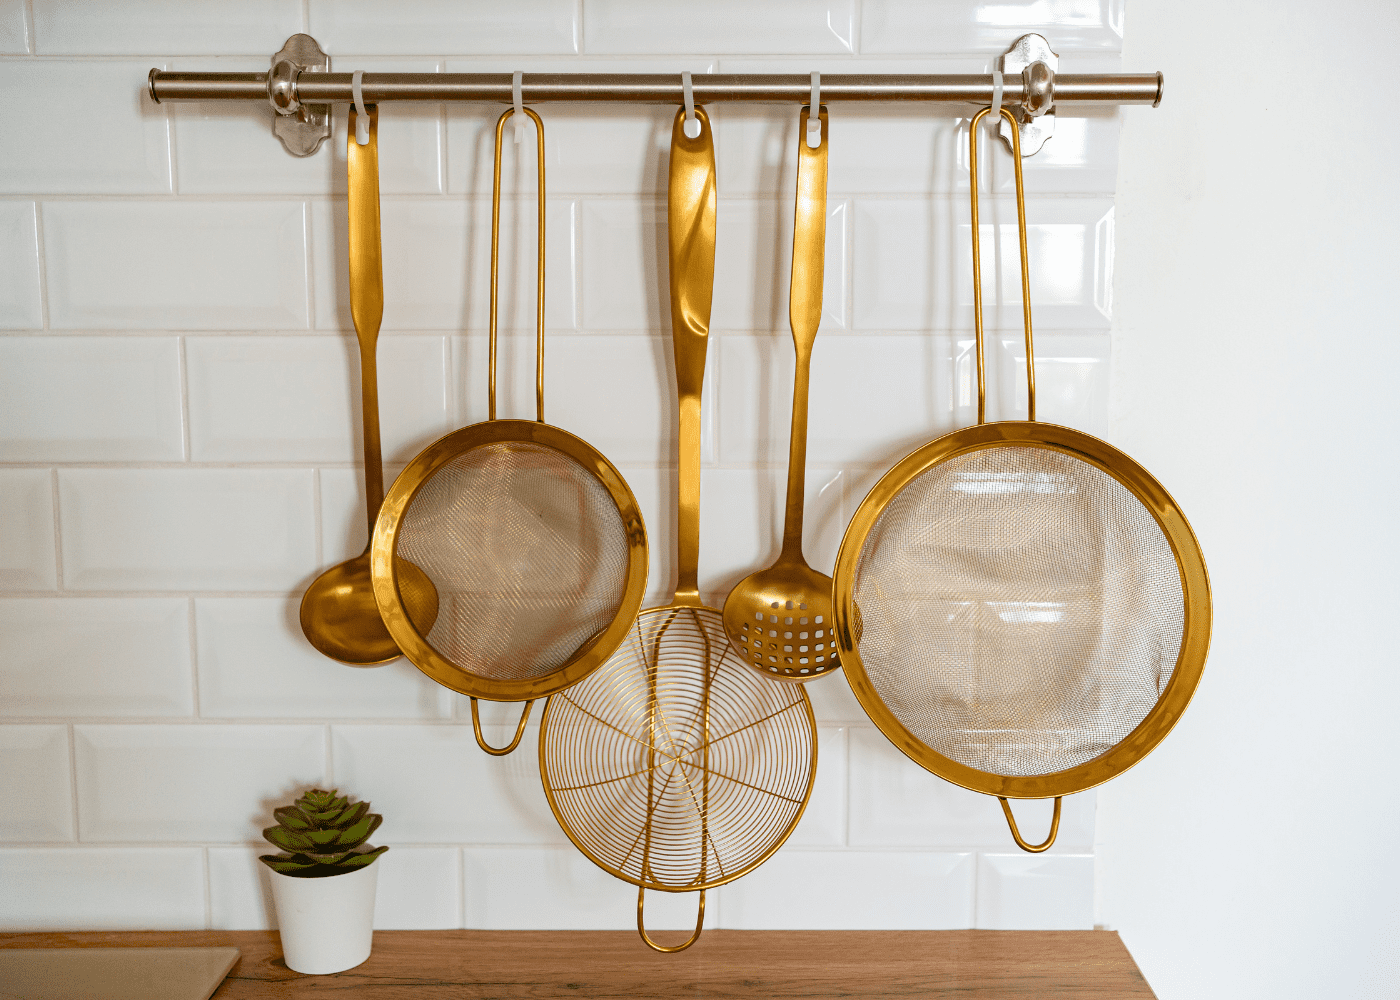 Gold colored kitchen spoons and strainers in front of a white wall